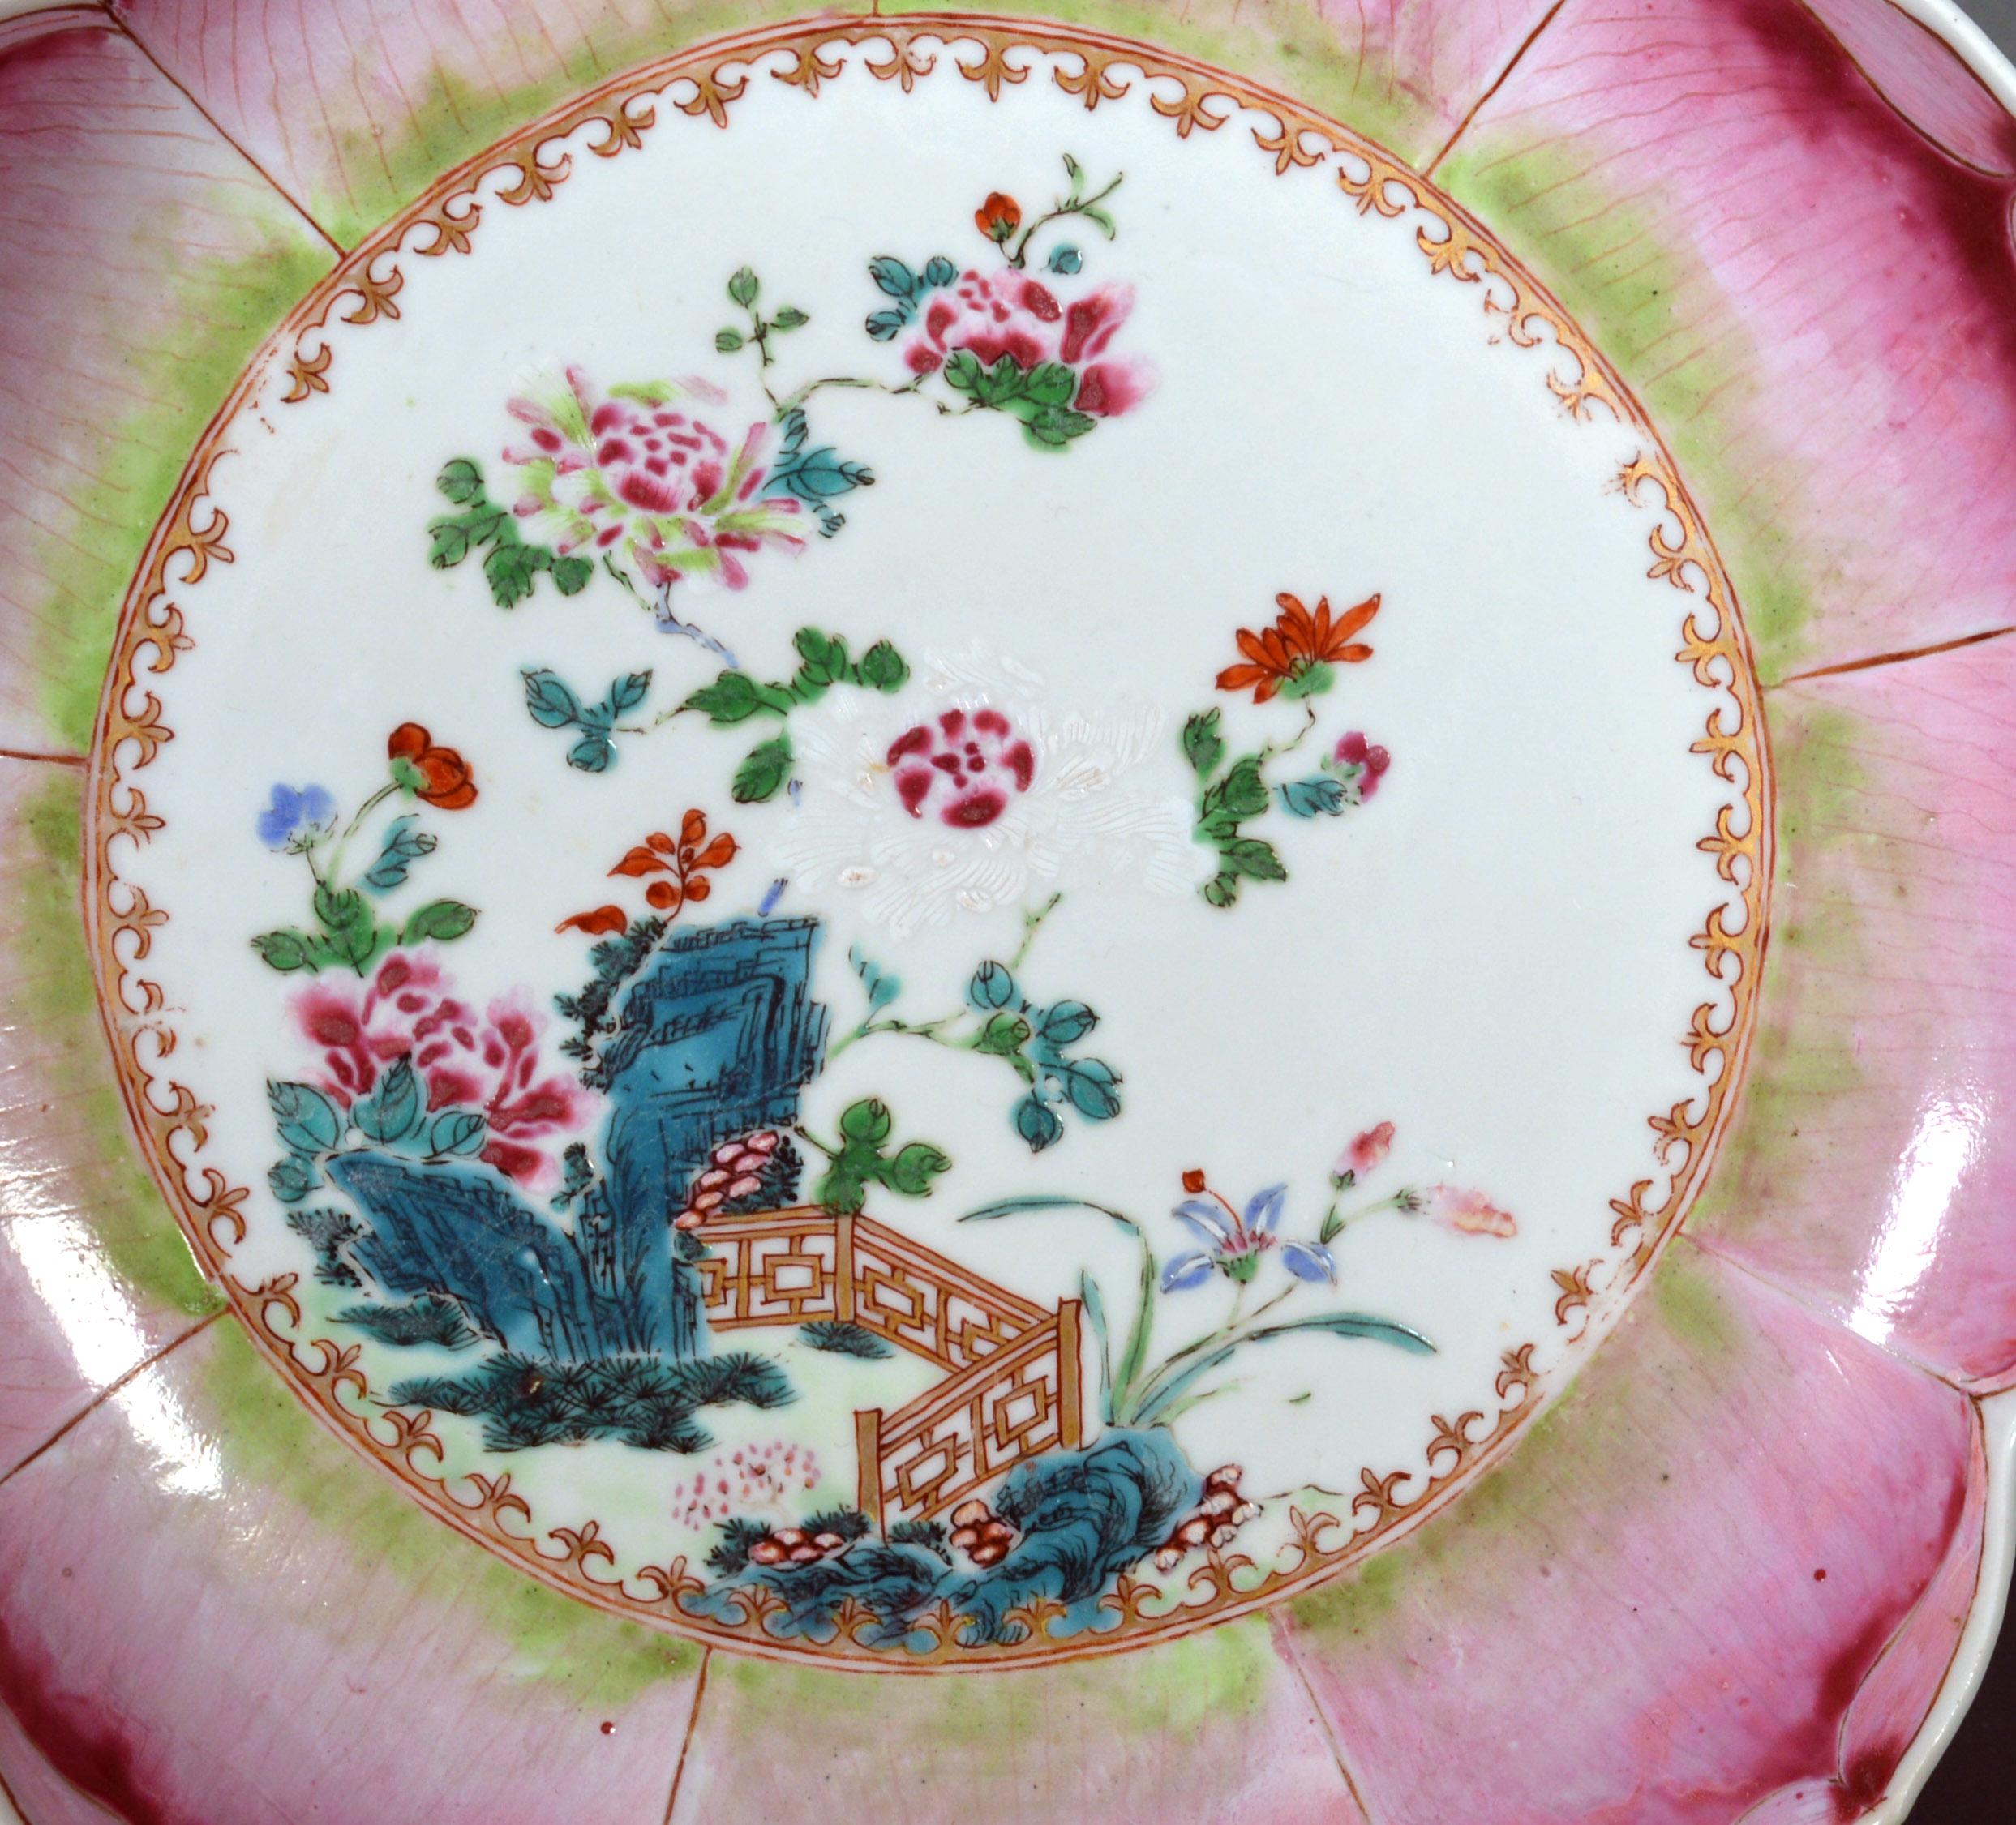 Chinese Export porcelain lotus leaf shaped dish,
circa 1765

The large Chinese Export “famille rose” porcelain saucer dish is made in the form of a lotus leaf with the rim and border in the form of nine different lotus leaf petals in shades of